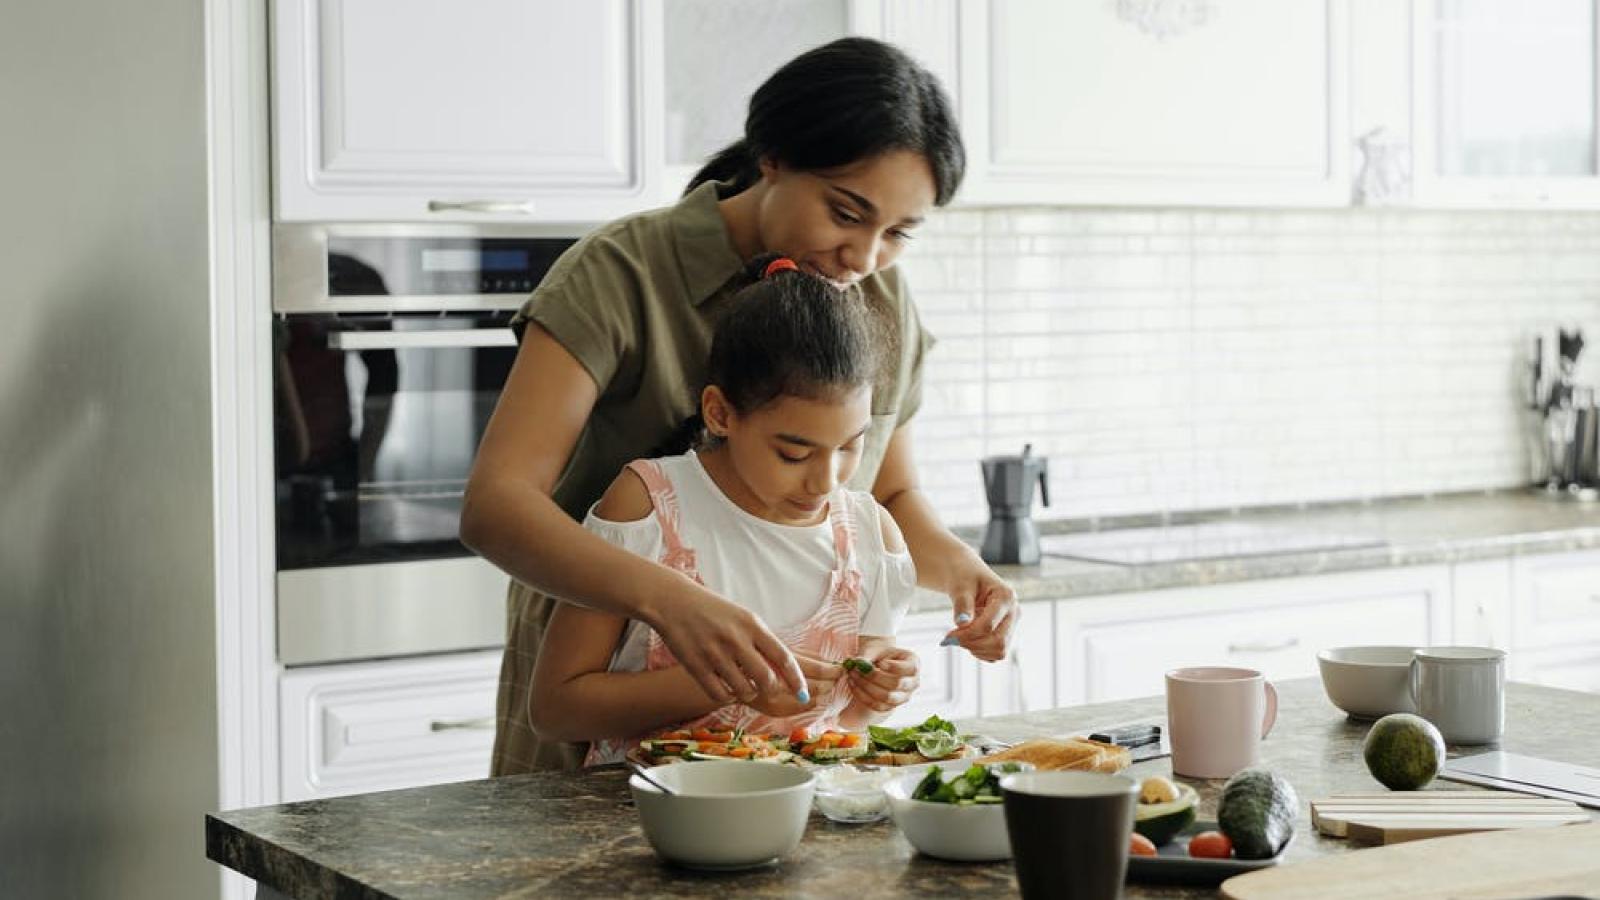 Young girl helping adult woman prepare vegetables